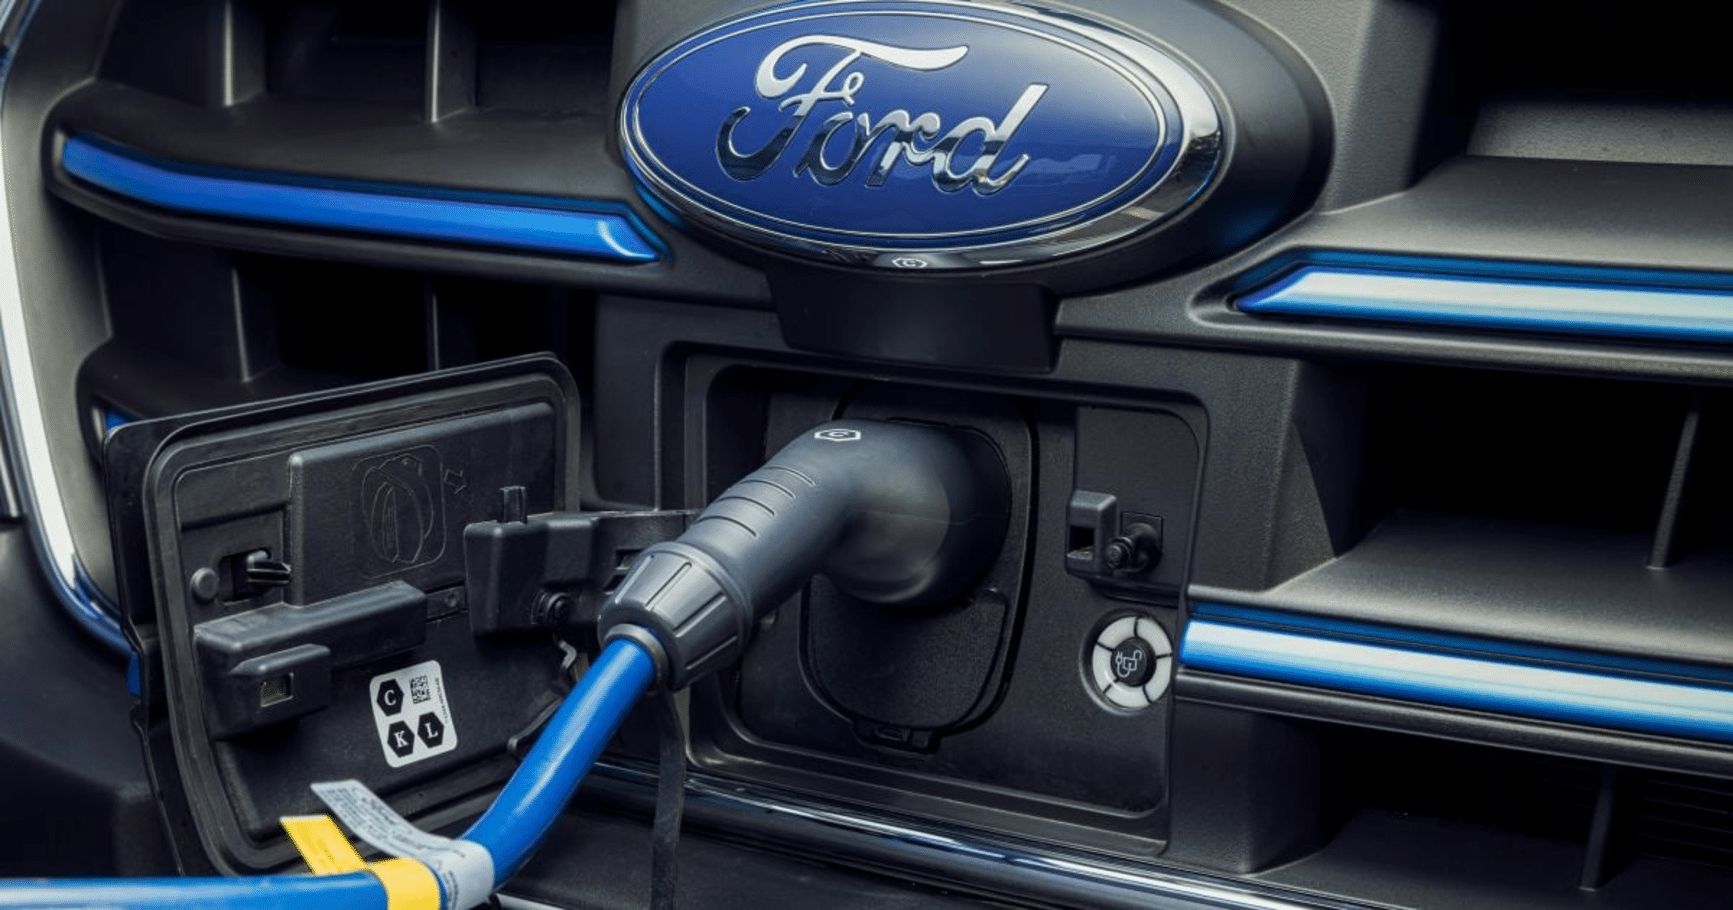 Ford’s Smaller and Cheaper Electric Vehicle Platform Takes on Tesla and Chinese Rivals